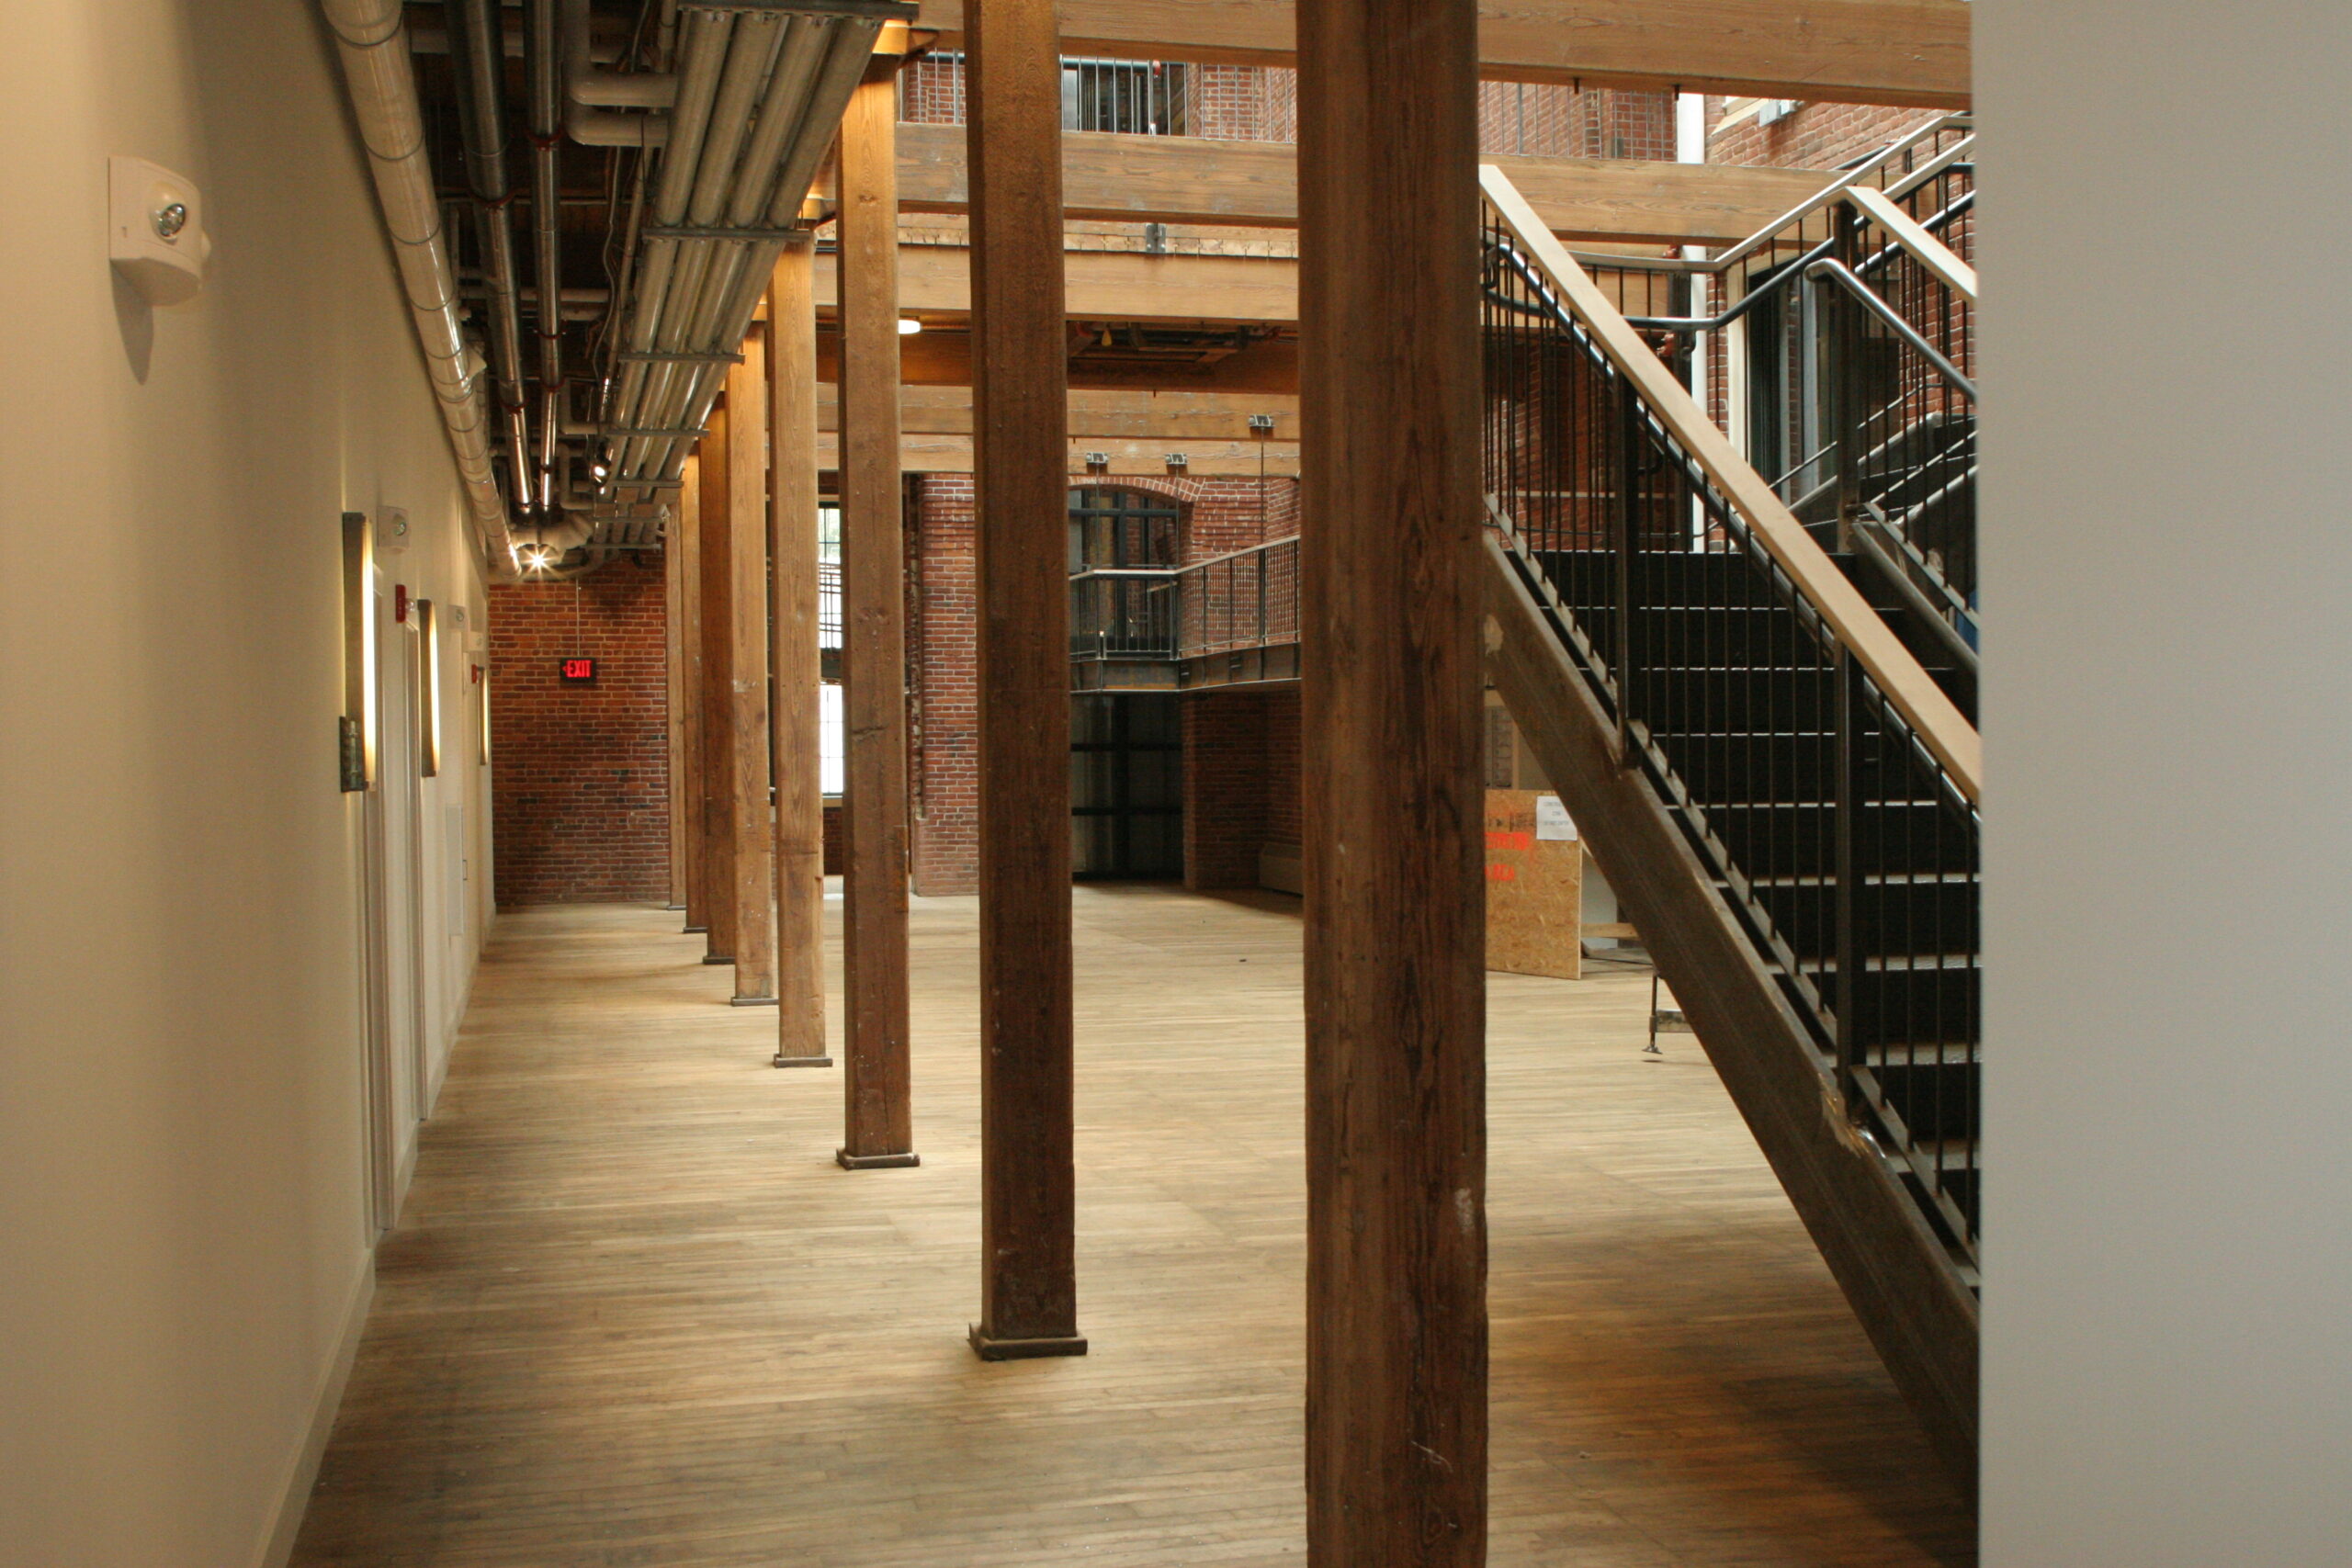 spacious room with wooden ceiling and floors, next to black metal staircase 